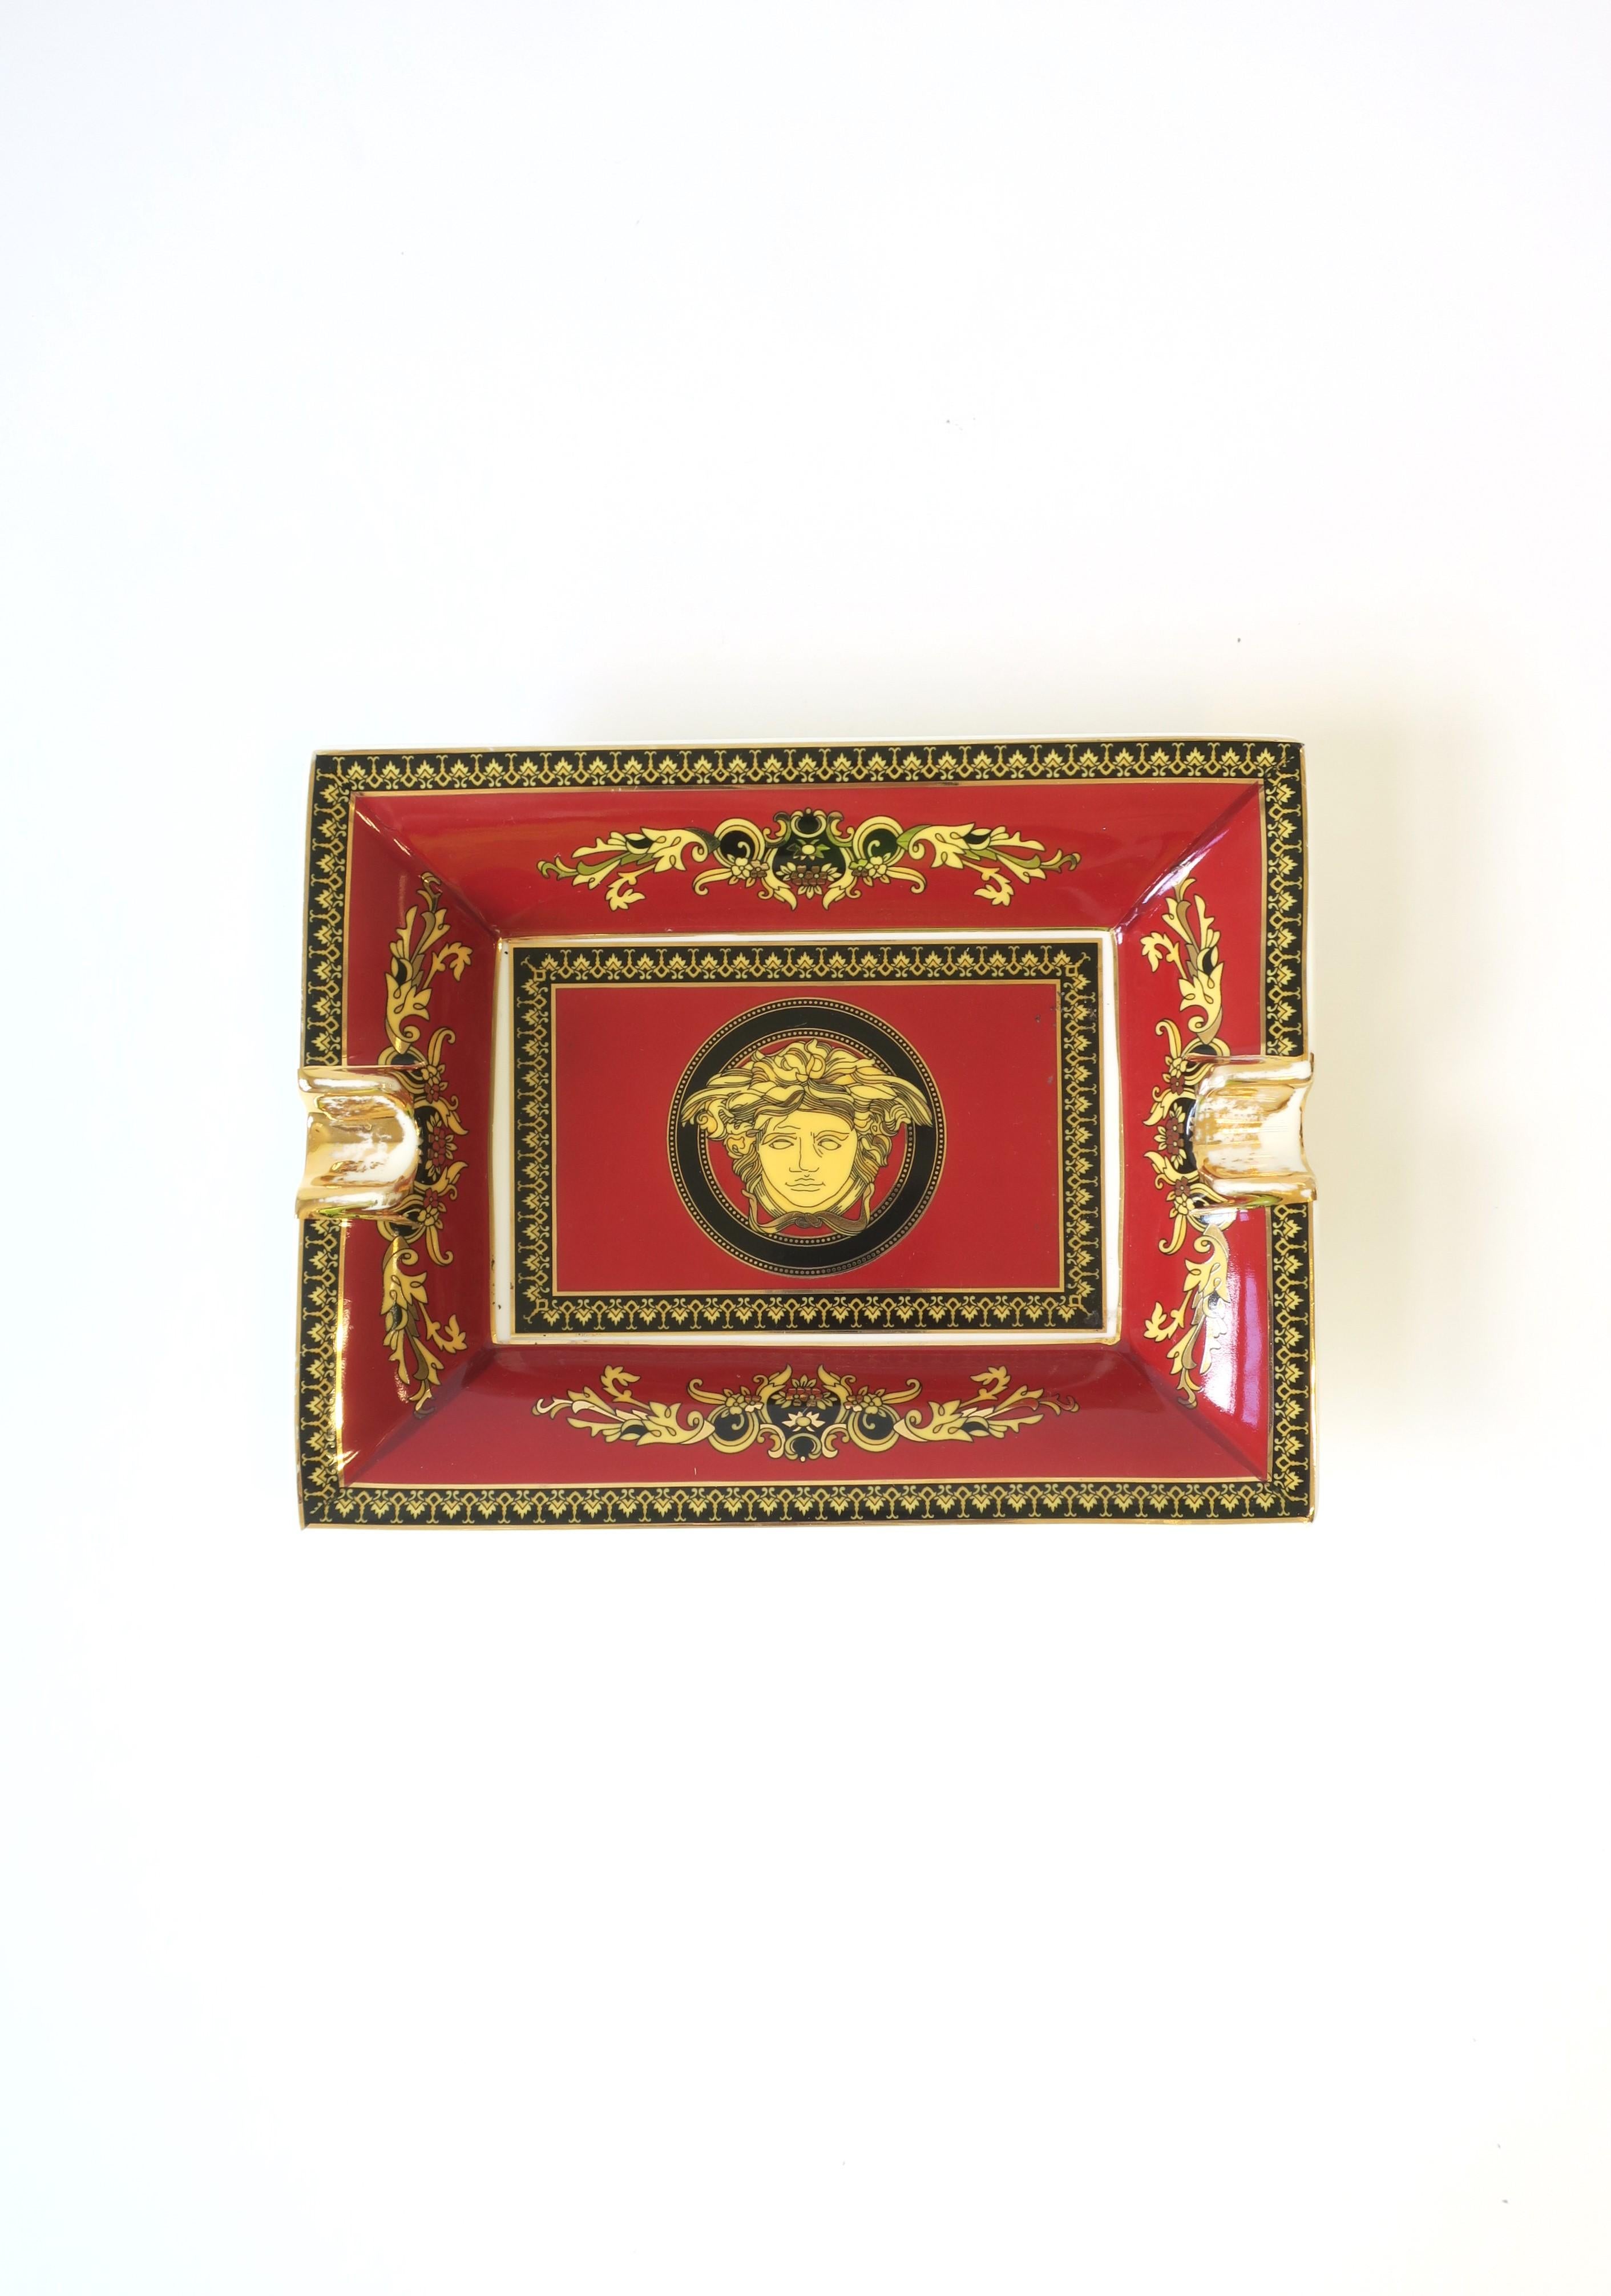 A 'Medusa' red burgundy and gold porcelain jewelry catchall tray dish vide-poche or ashtray from luxury Masion Versace, circa late-20th century. This porcelain tray is made by Rosenthal, Germany, for Versace, Italy, featuring the House of Versace’s